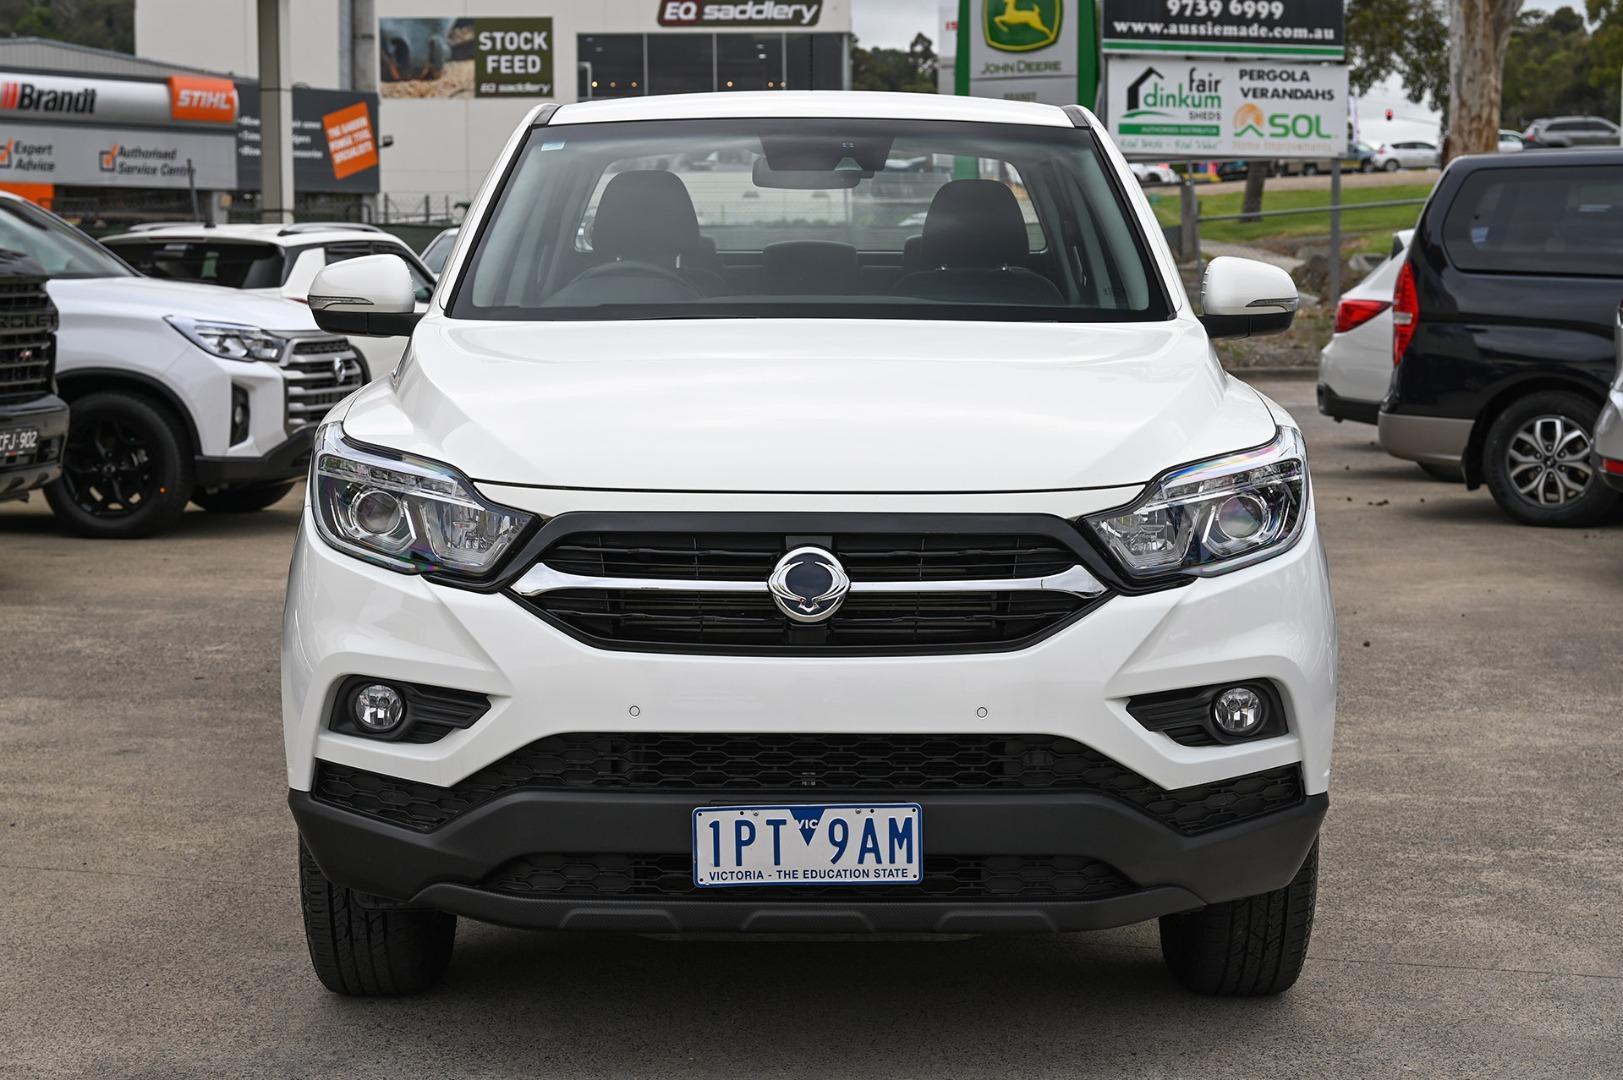 Ssangyong Musso image 2